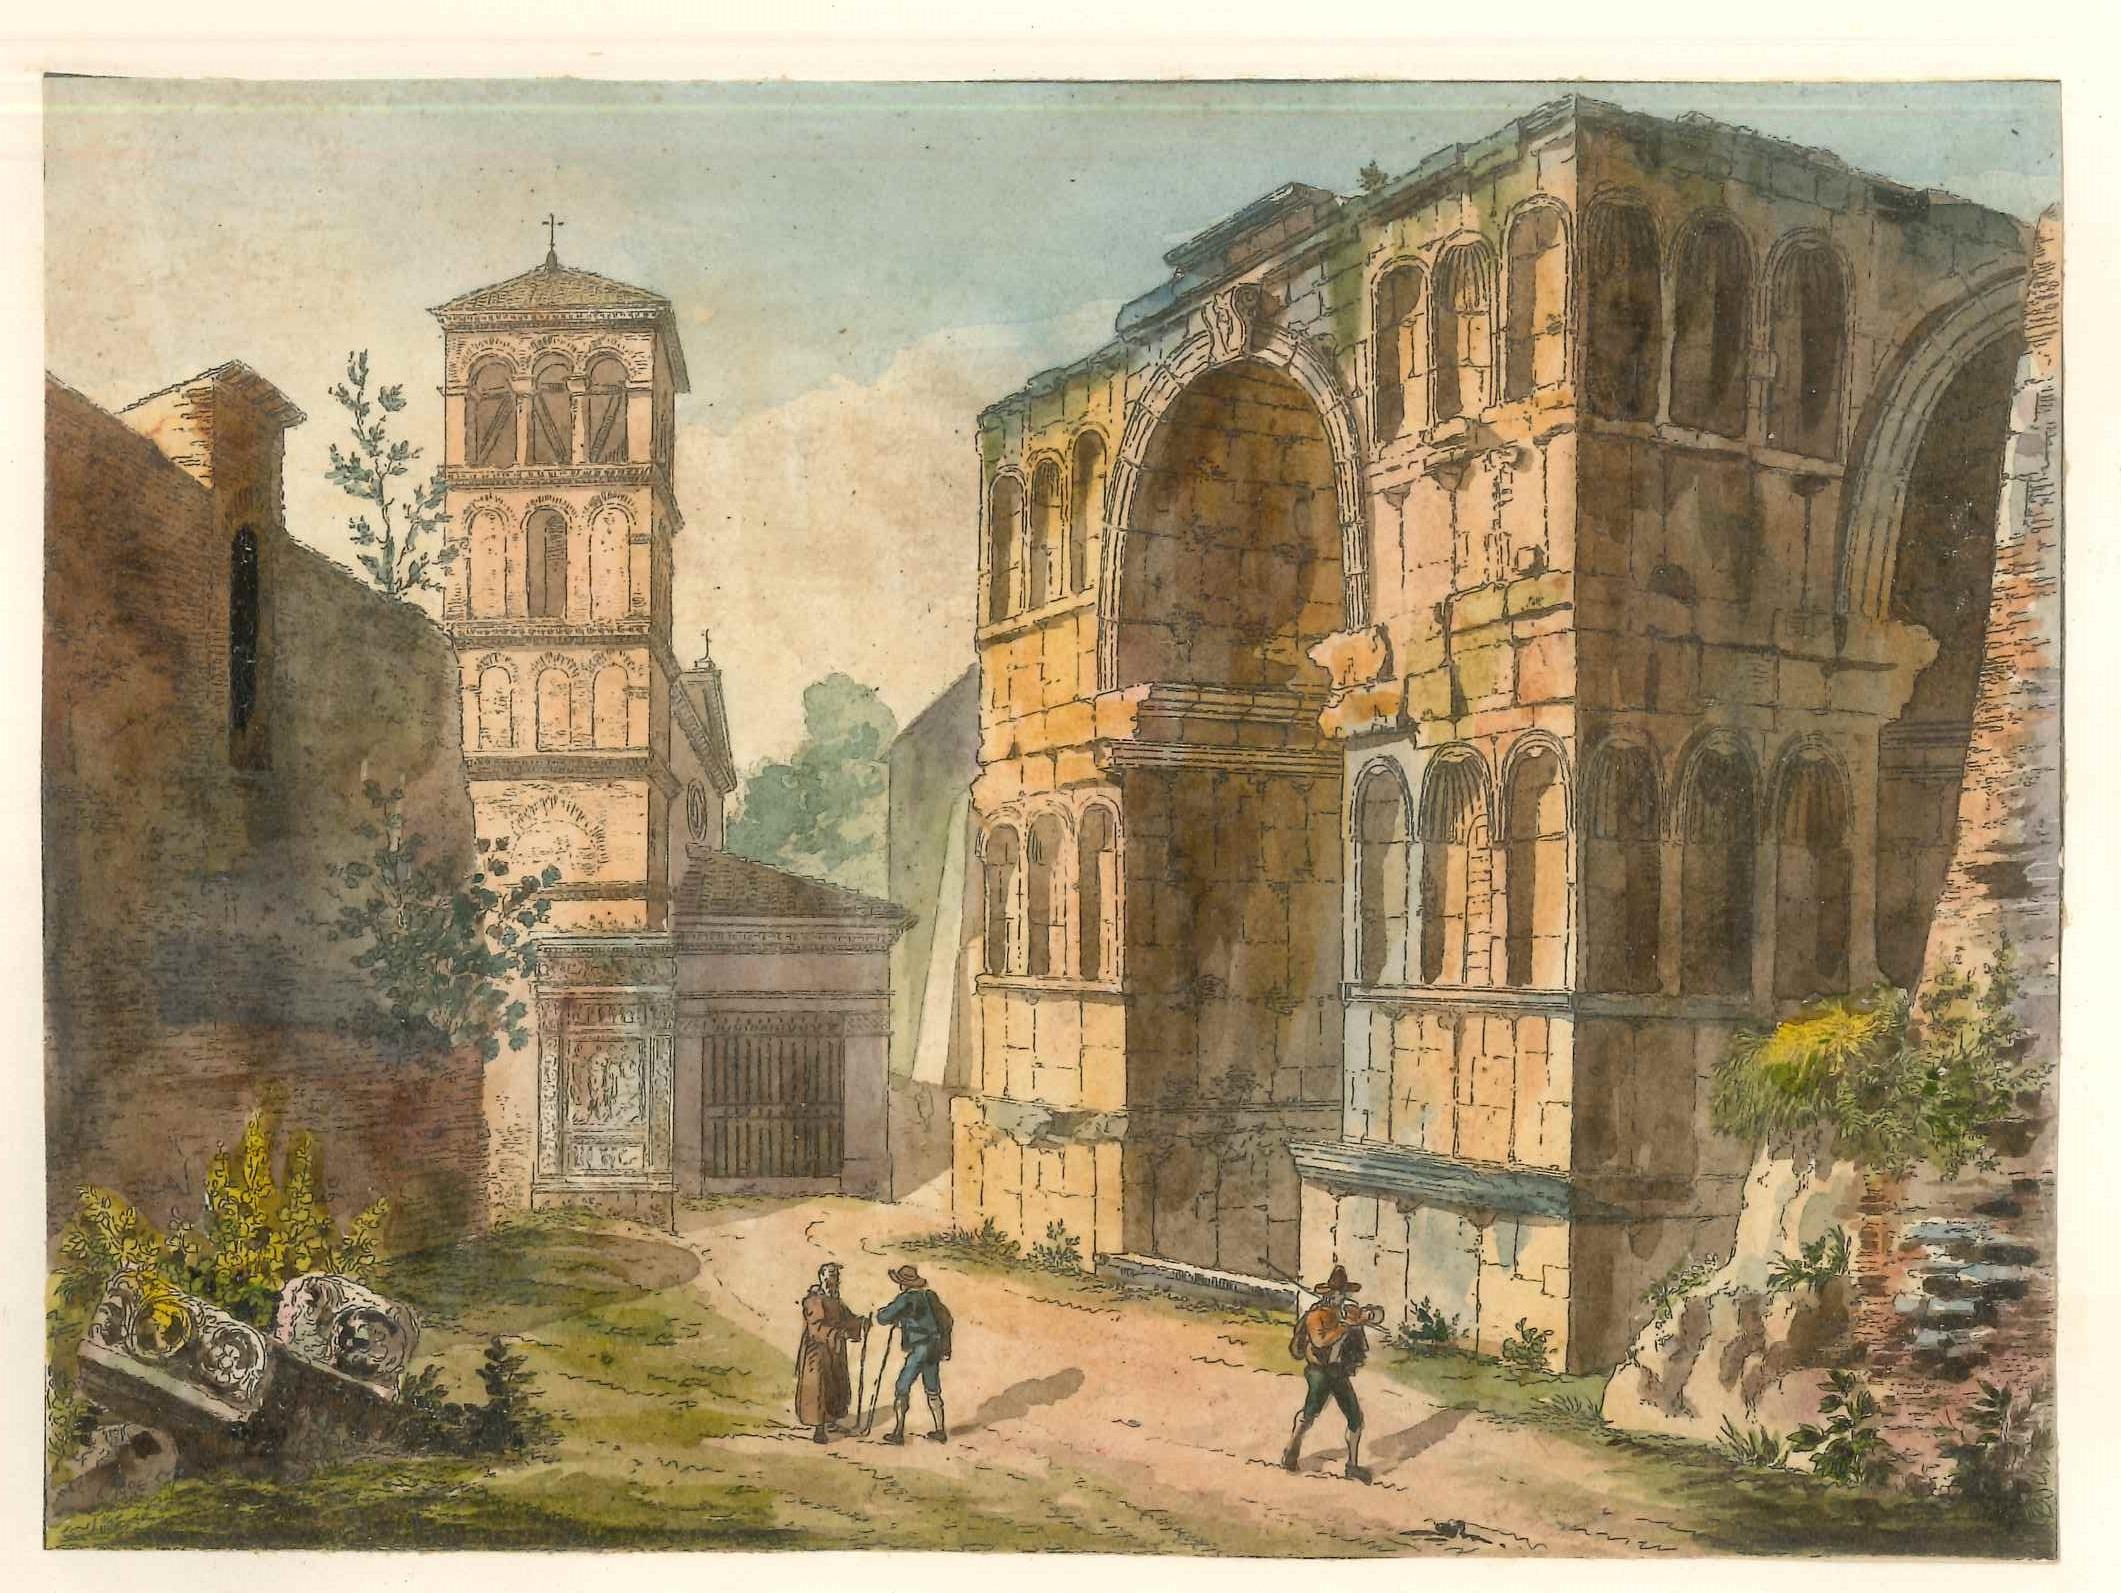 Triumphal Arches - Original Lithographs and Watercolors - Mid 19th Century - Modern Print by Unknown